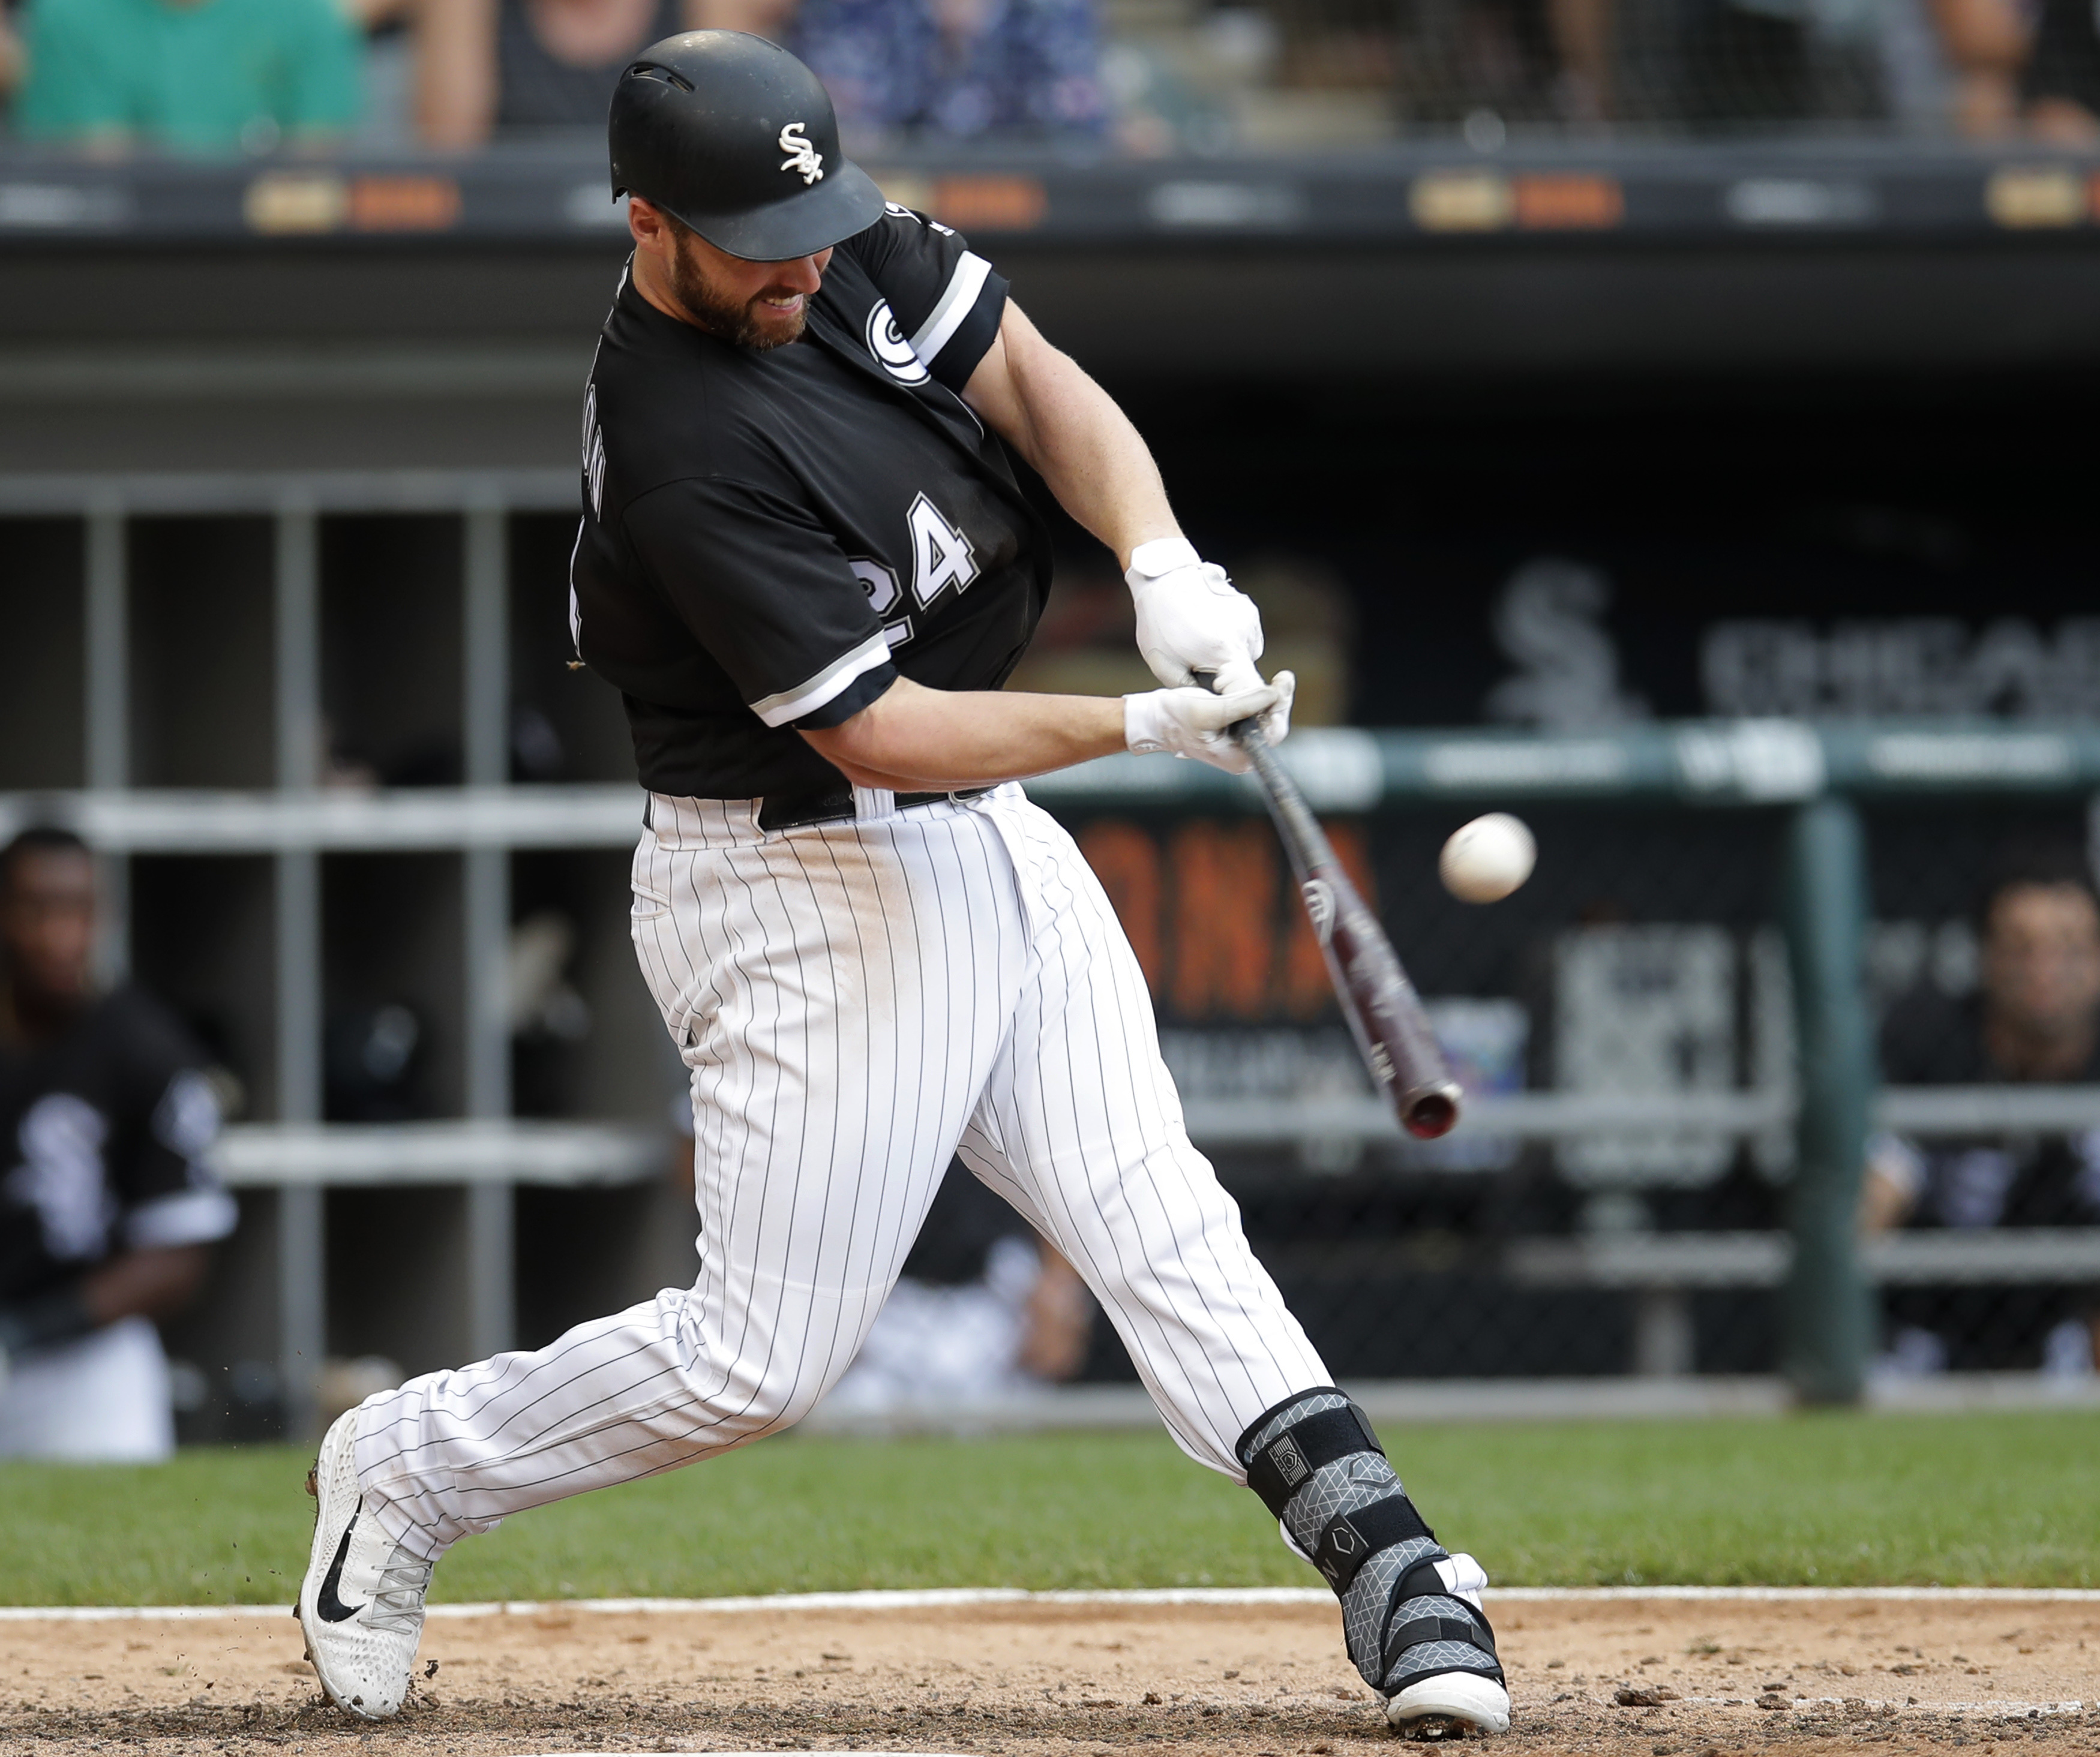 Davidson, Palka homer in 9th to lift White Sox over Tigers